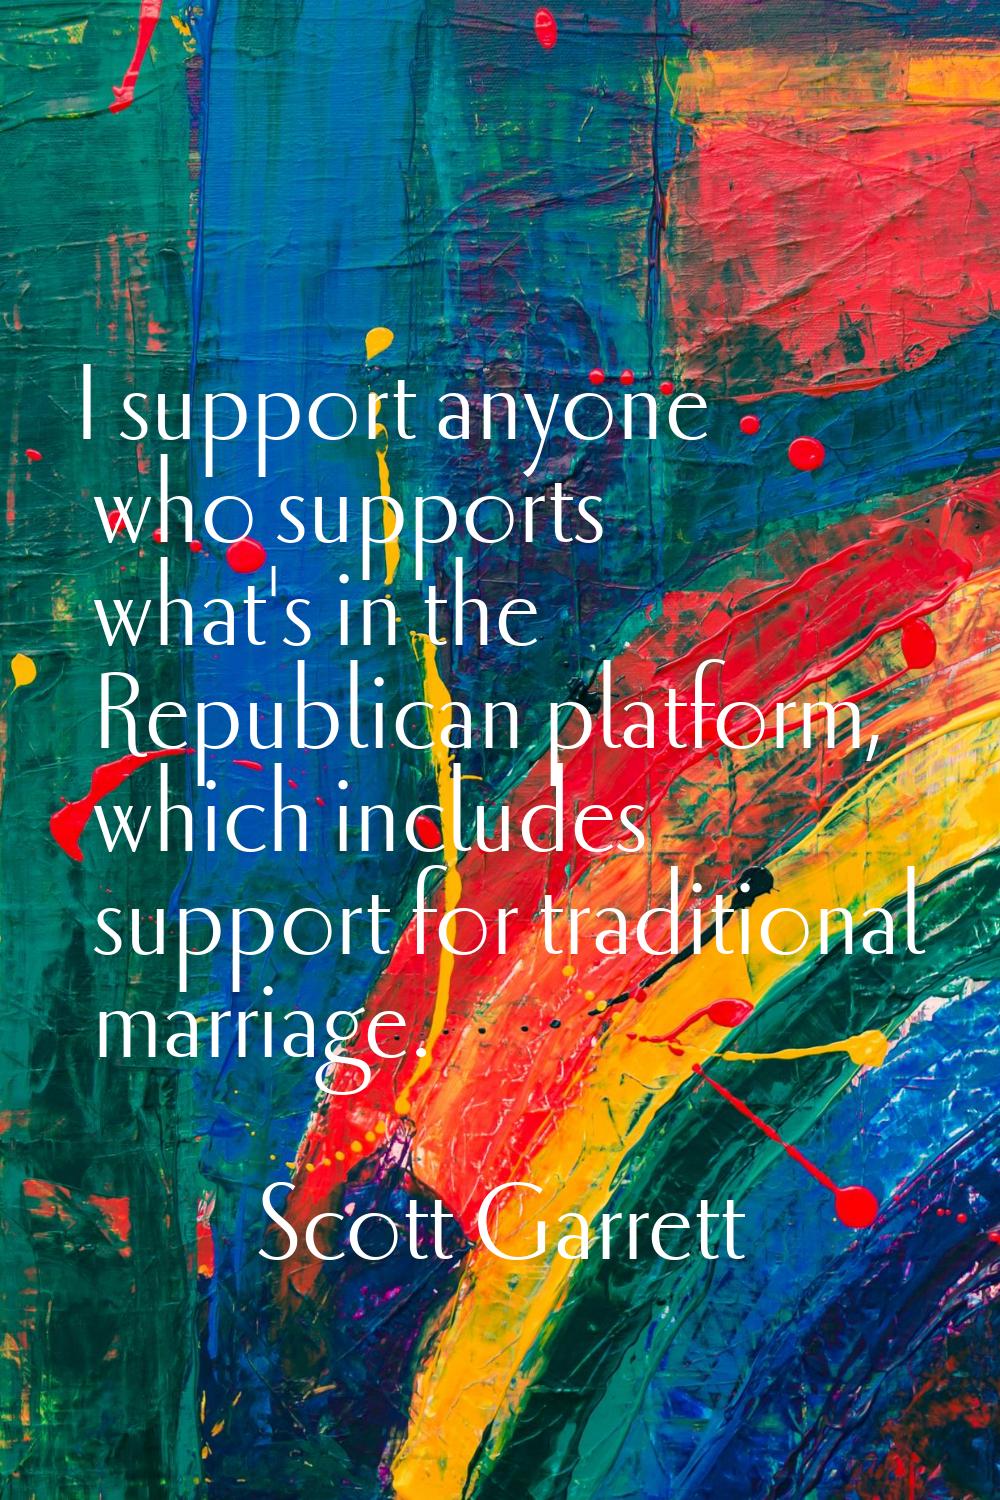 I support anyone who supports what's in the Republican platform, which includes support for traditi